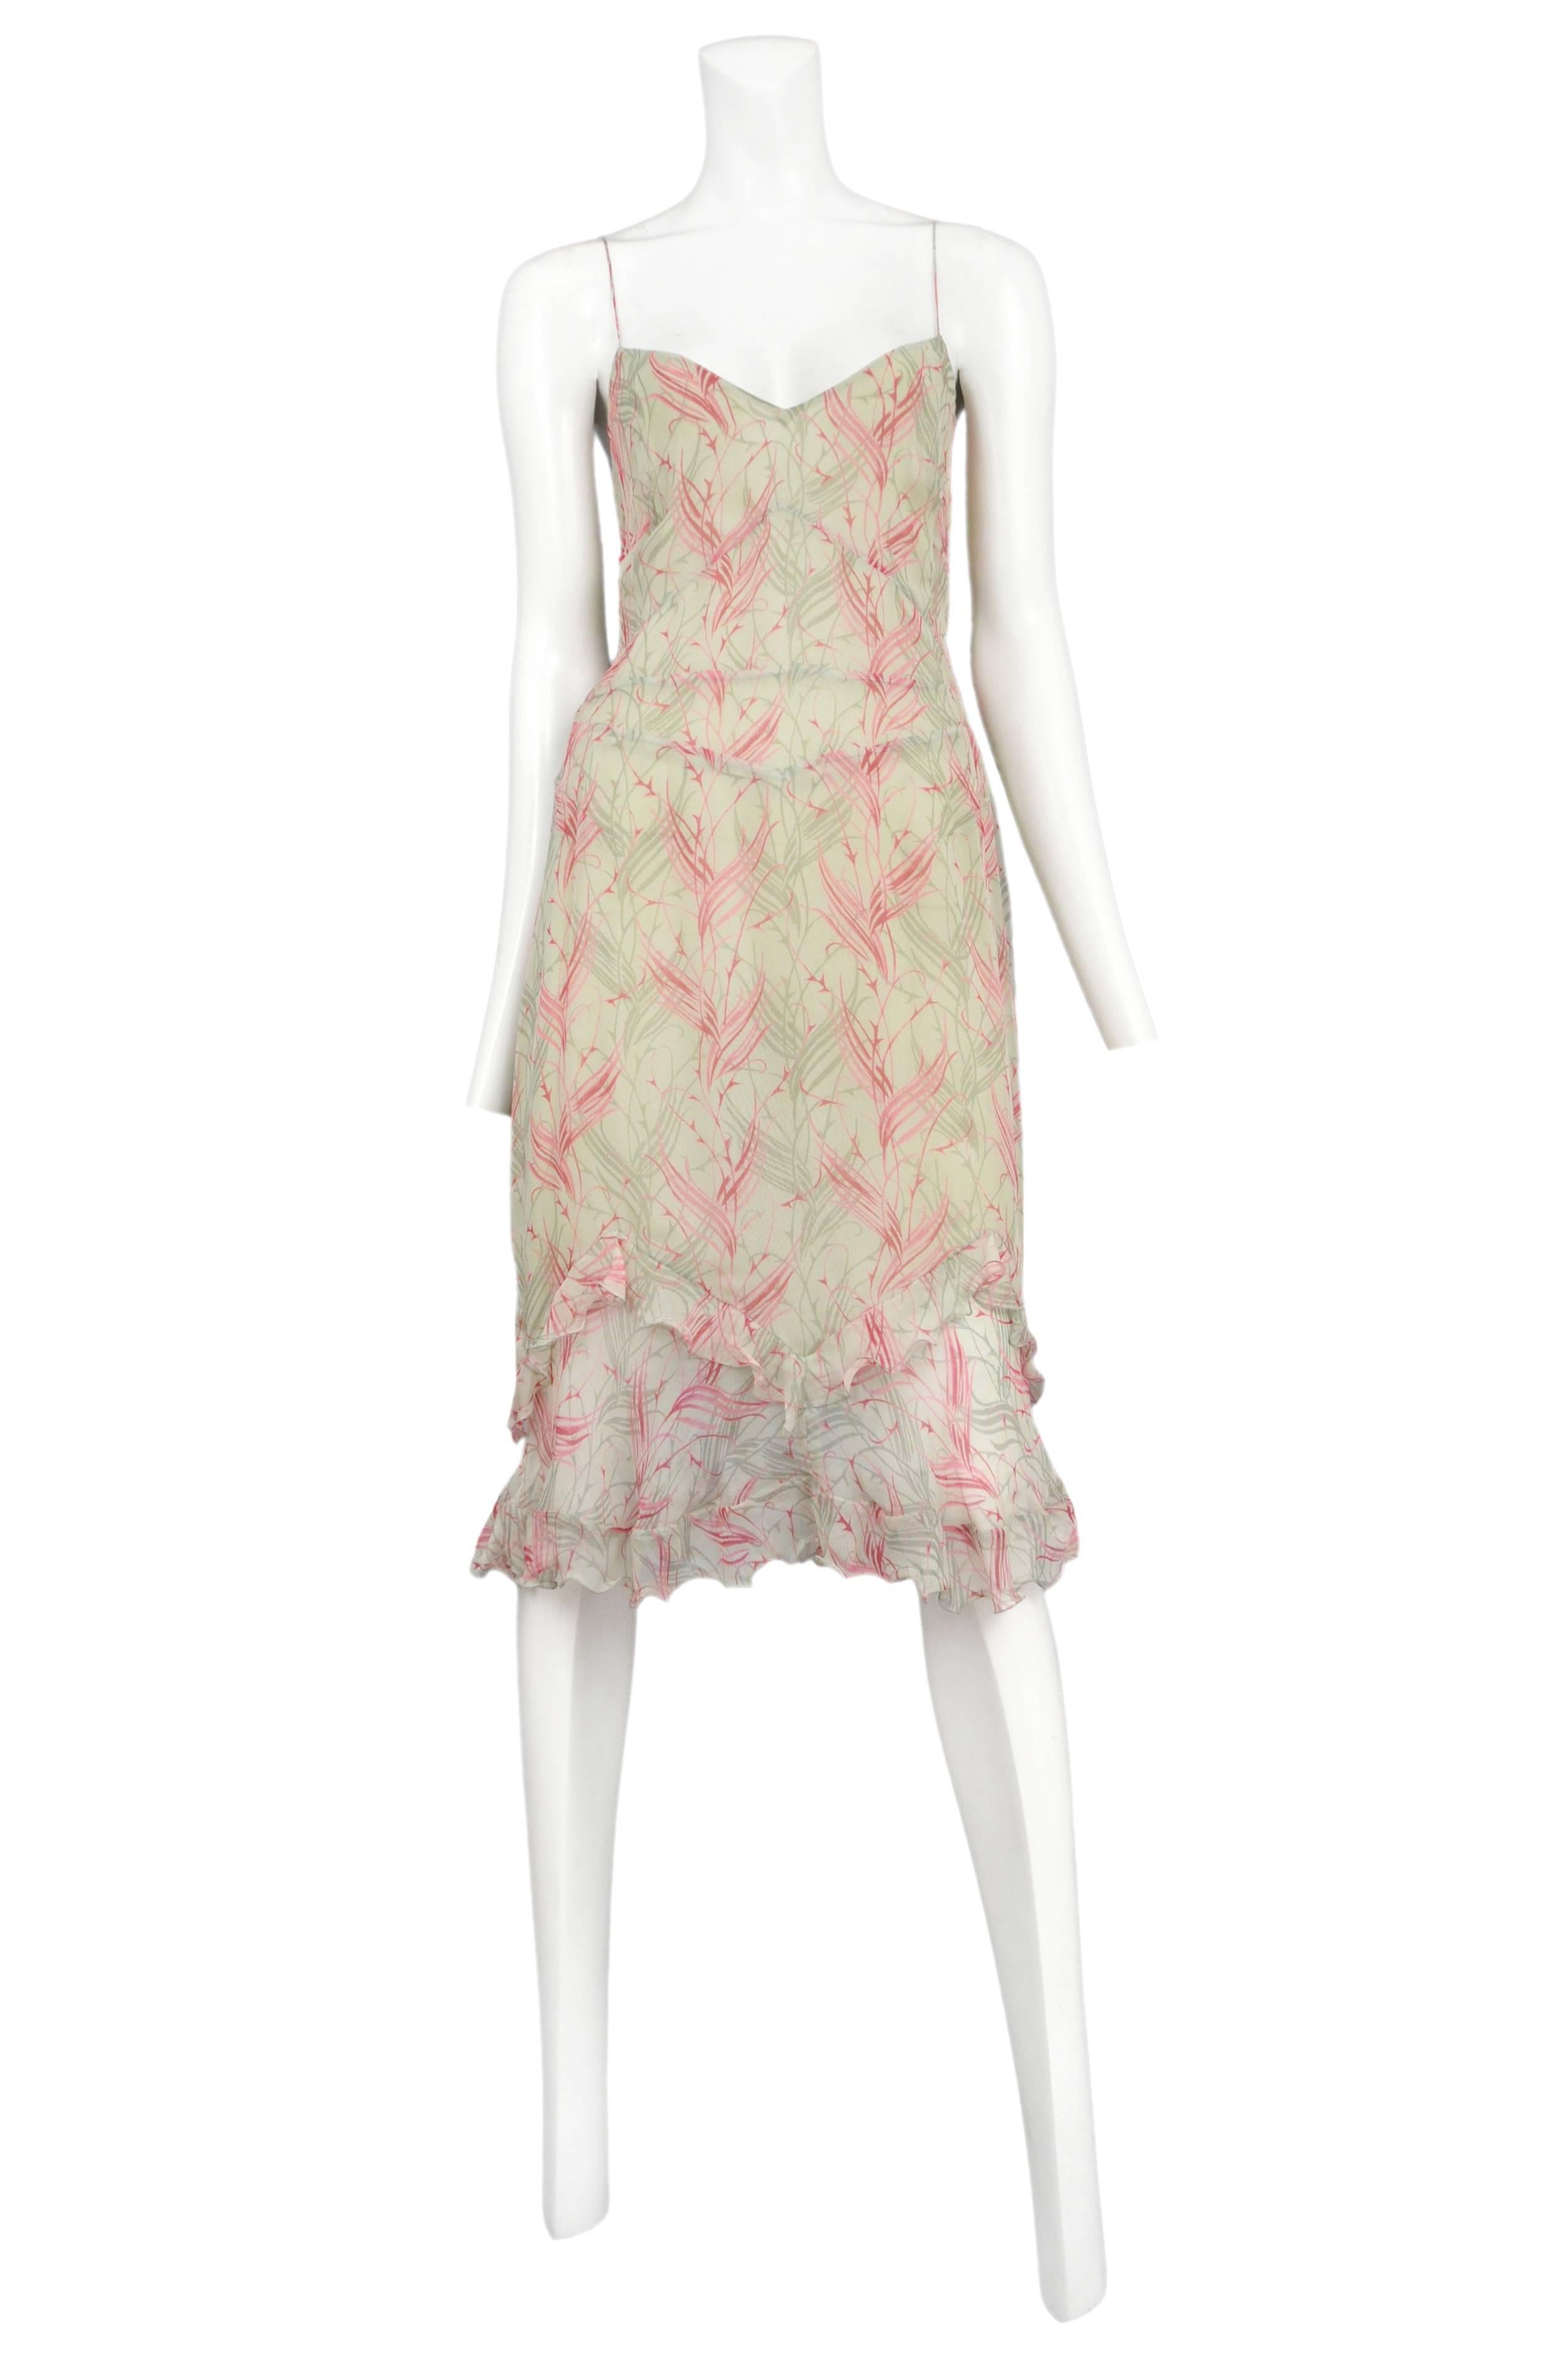 Vintage Stella McCartney for Chloe pastel green silk knee length slip dress featuring a pink abstract feather print and two tiers of ruffles at the hem. Runway piece from the 1999 Spring / Summer Collection.
Please inquire for additional images.